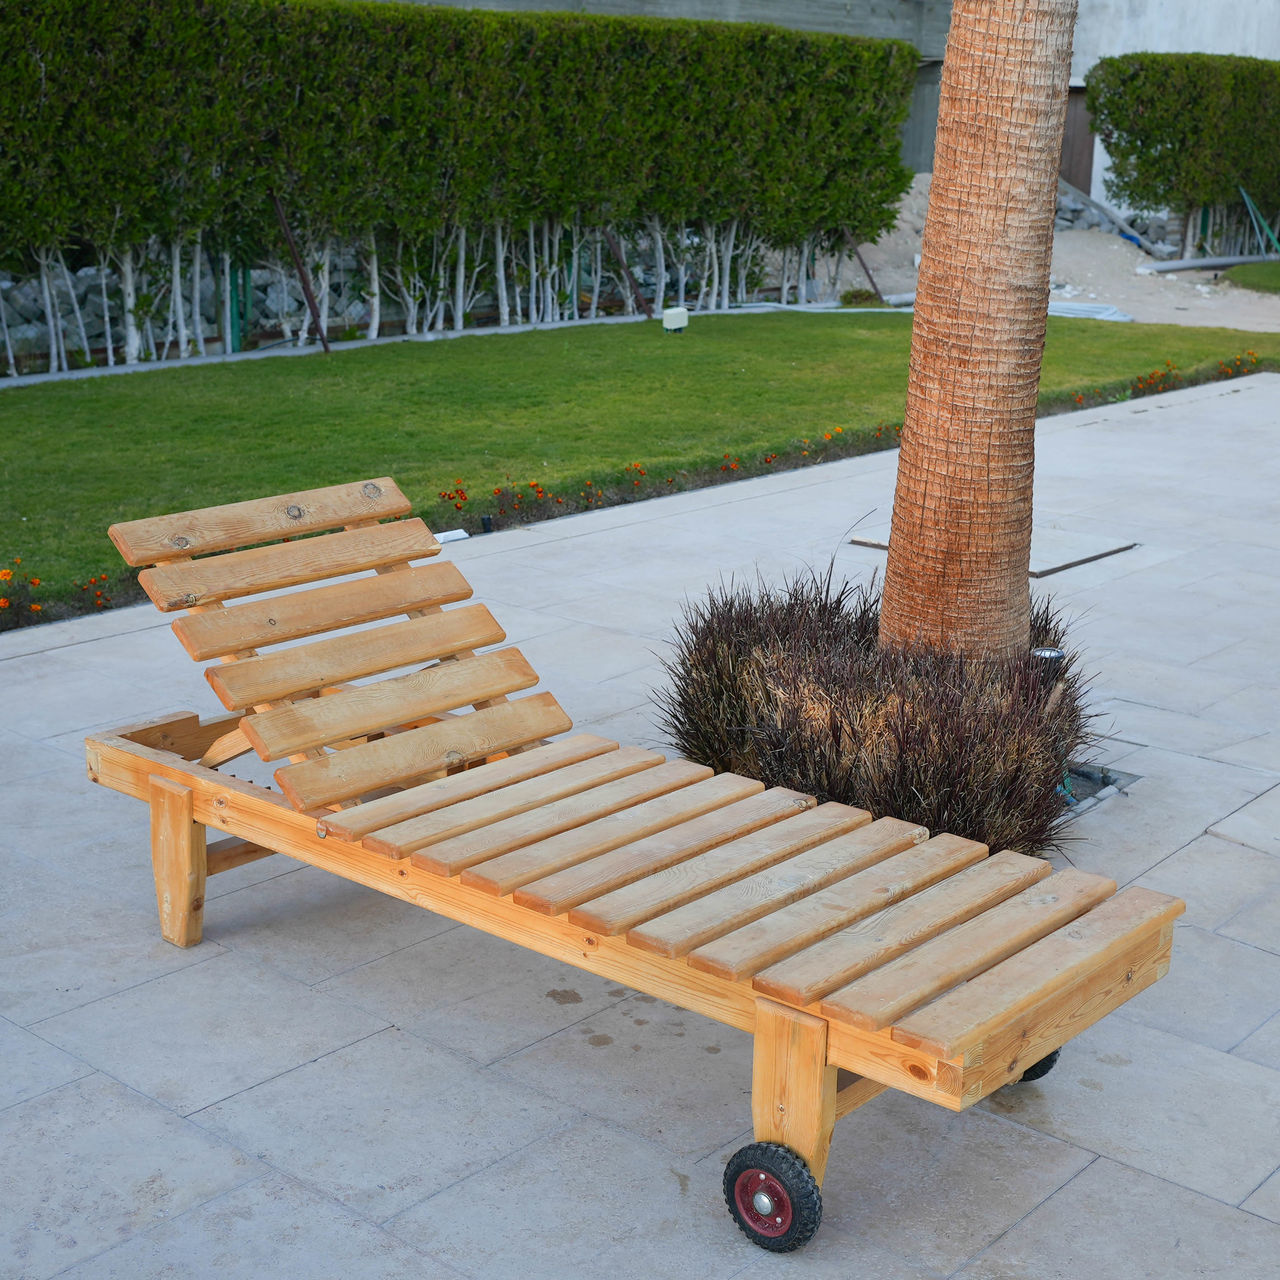 plant, furniture, seat, grass, bench, nature, no people, park, wood, tree, footpath, park - man made space, day, growth, outdoors, empty, park bench, green, relaxation, chair, table, front or back yard, absence, outdoor furniture, tranquility